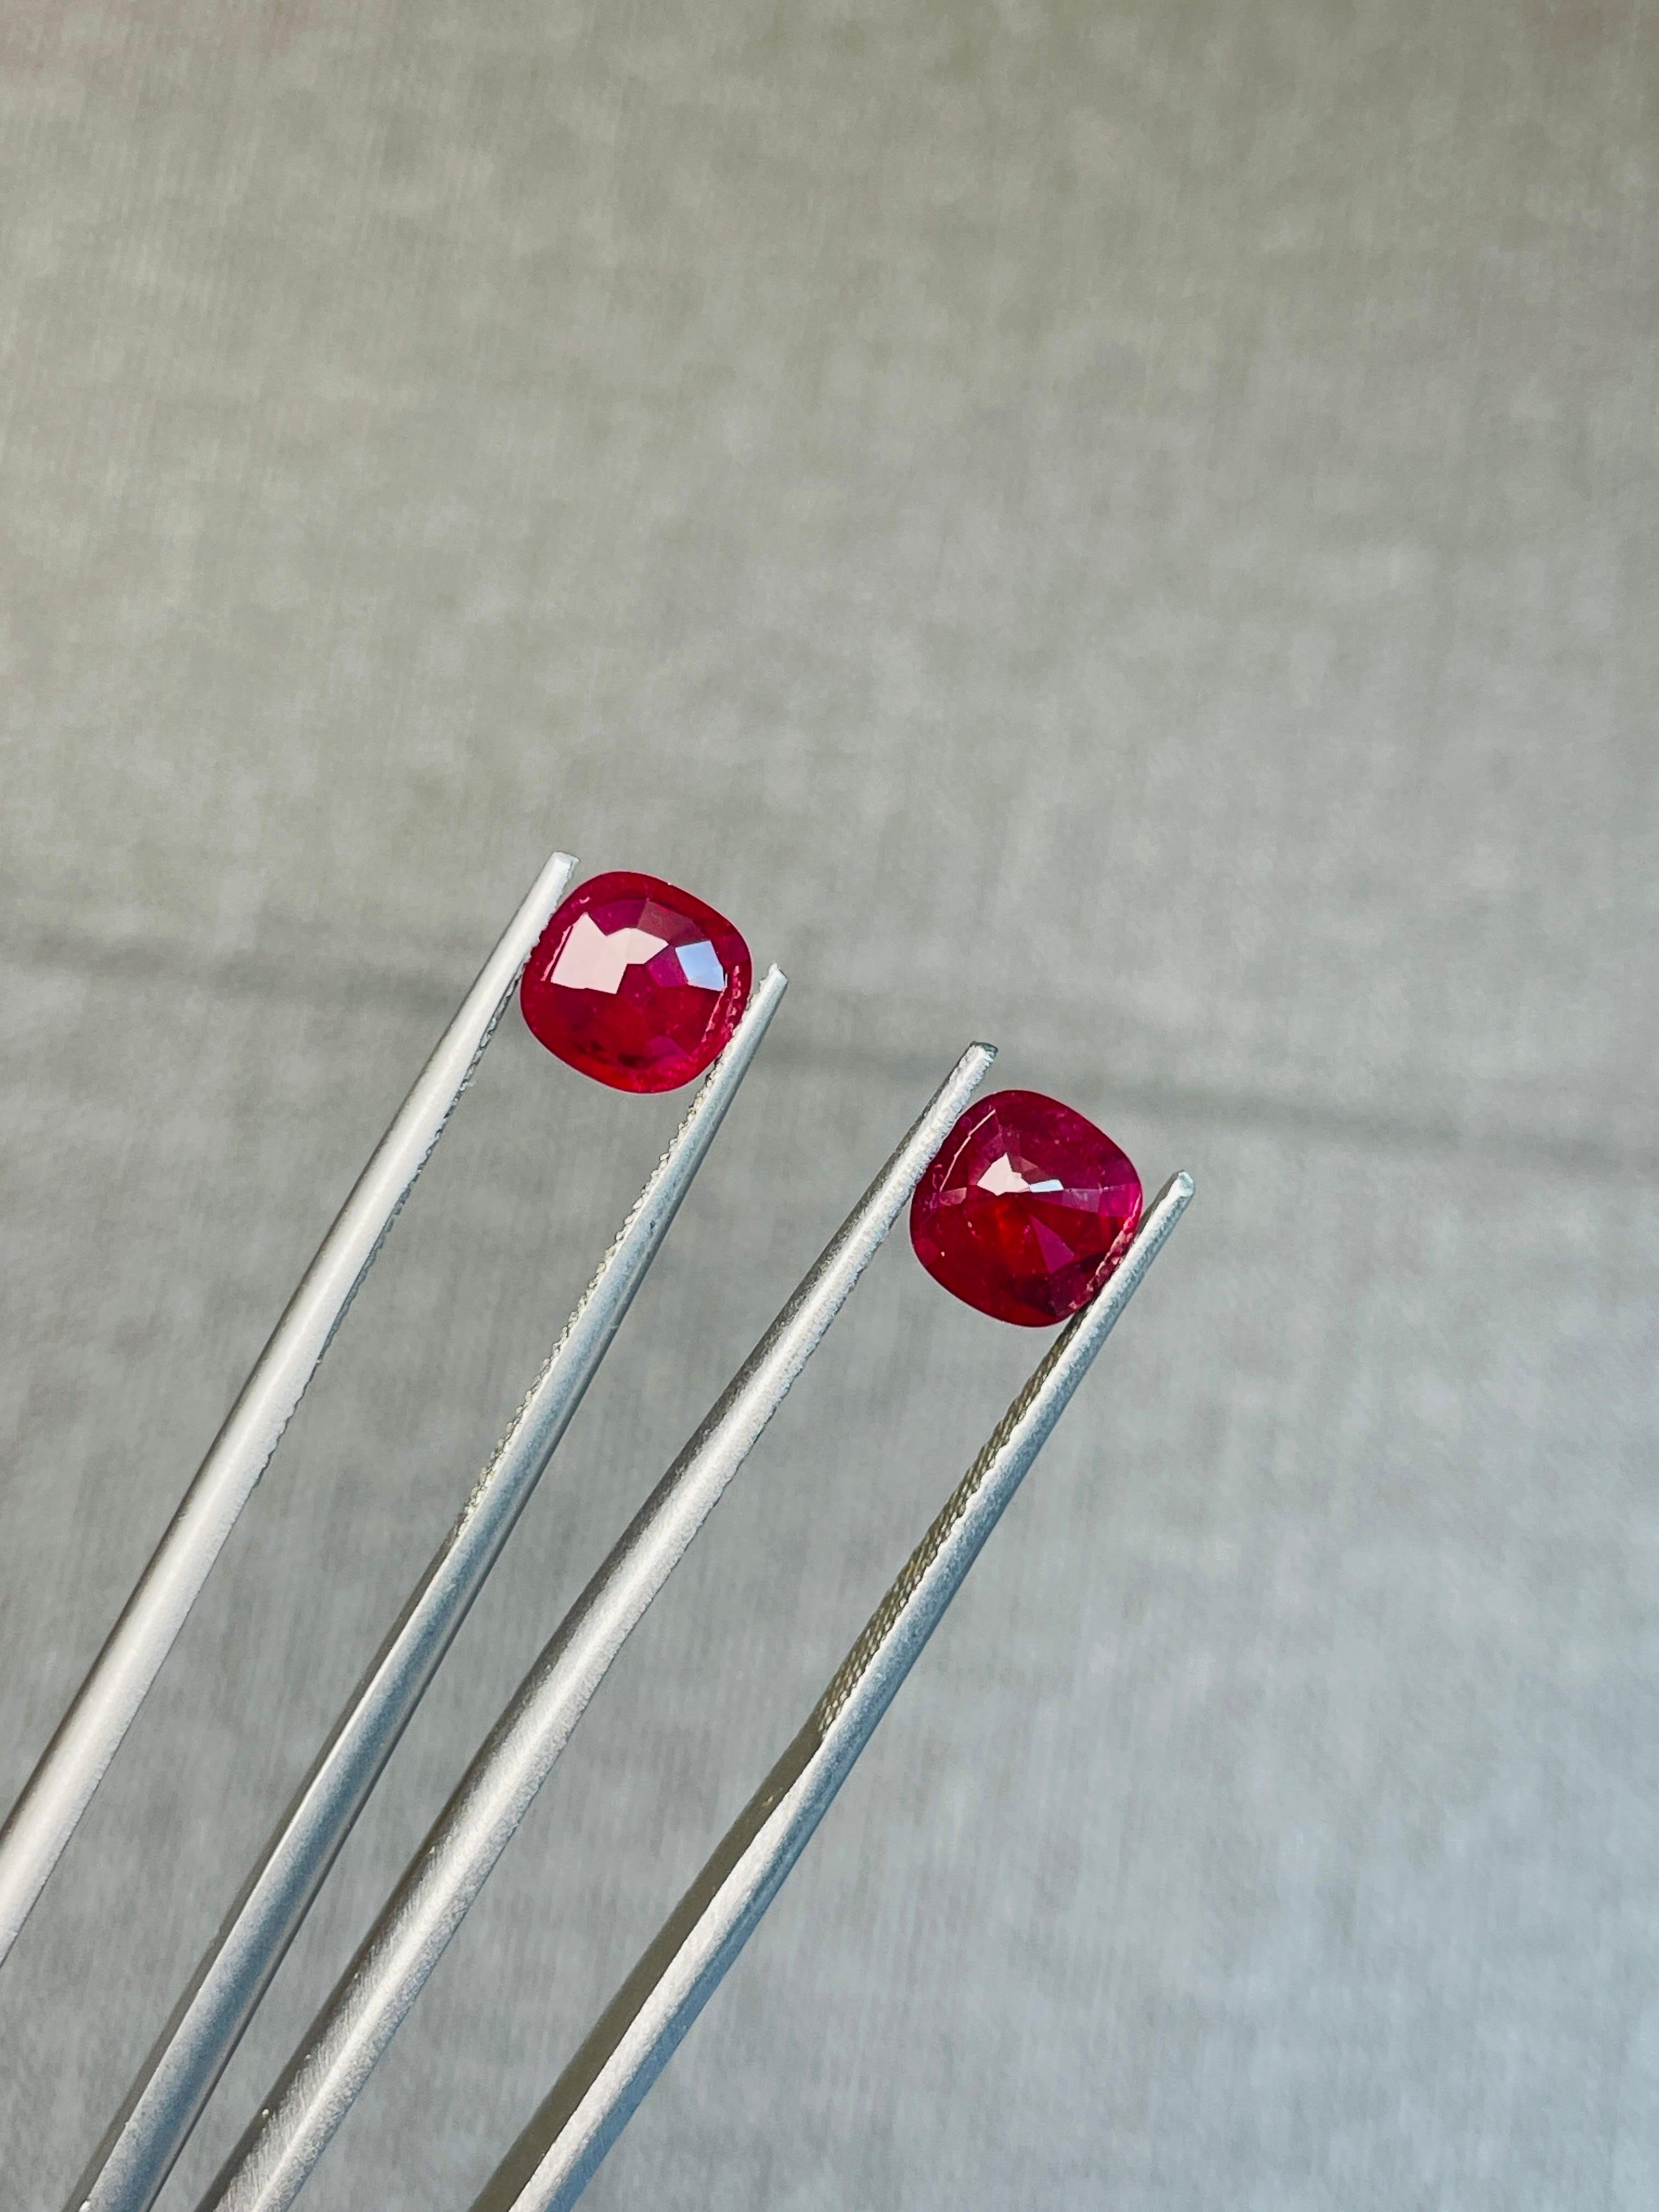 Rare pair 2.06ct burma ruby unheated pigeon blood color GIA AIGS certificate  For Sale 6